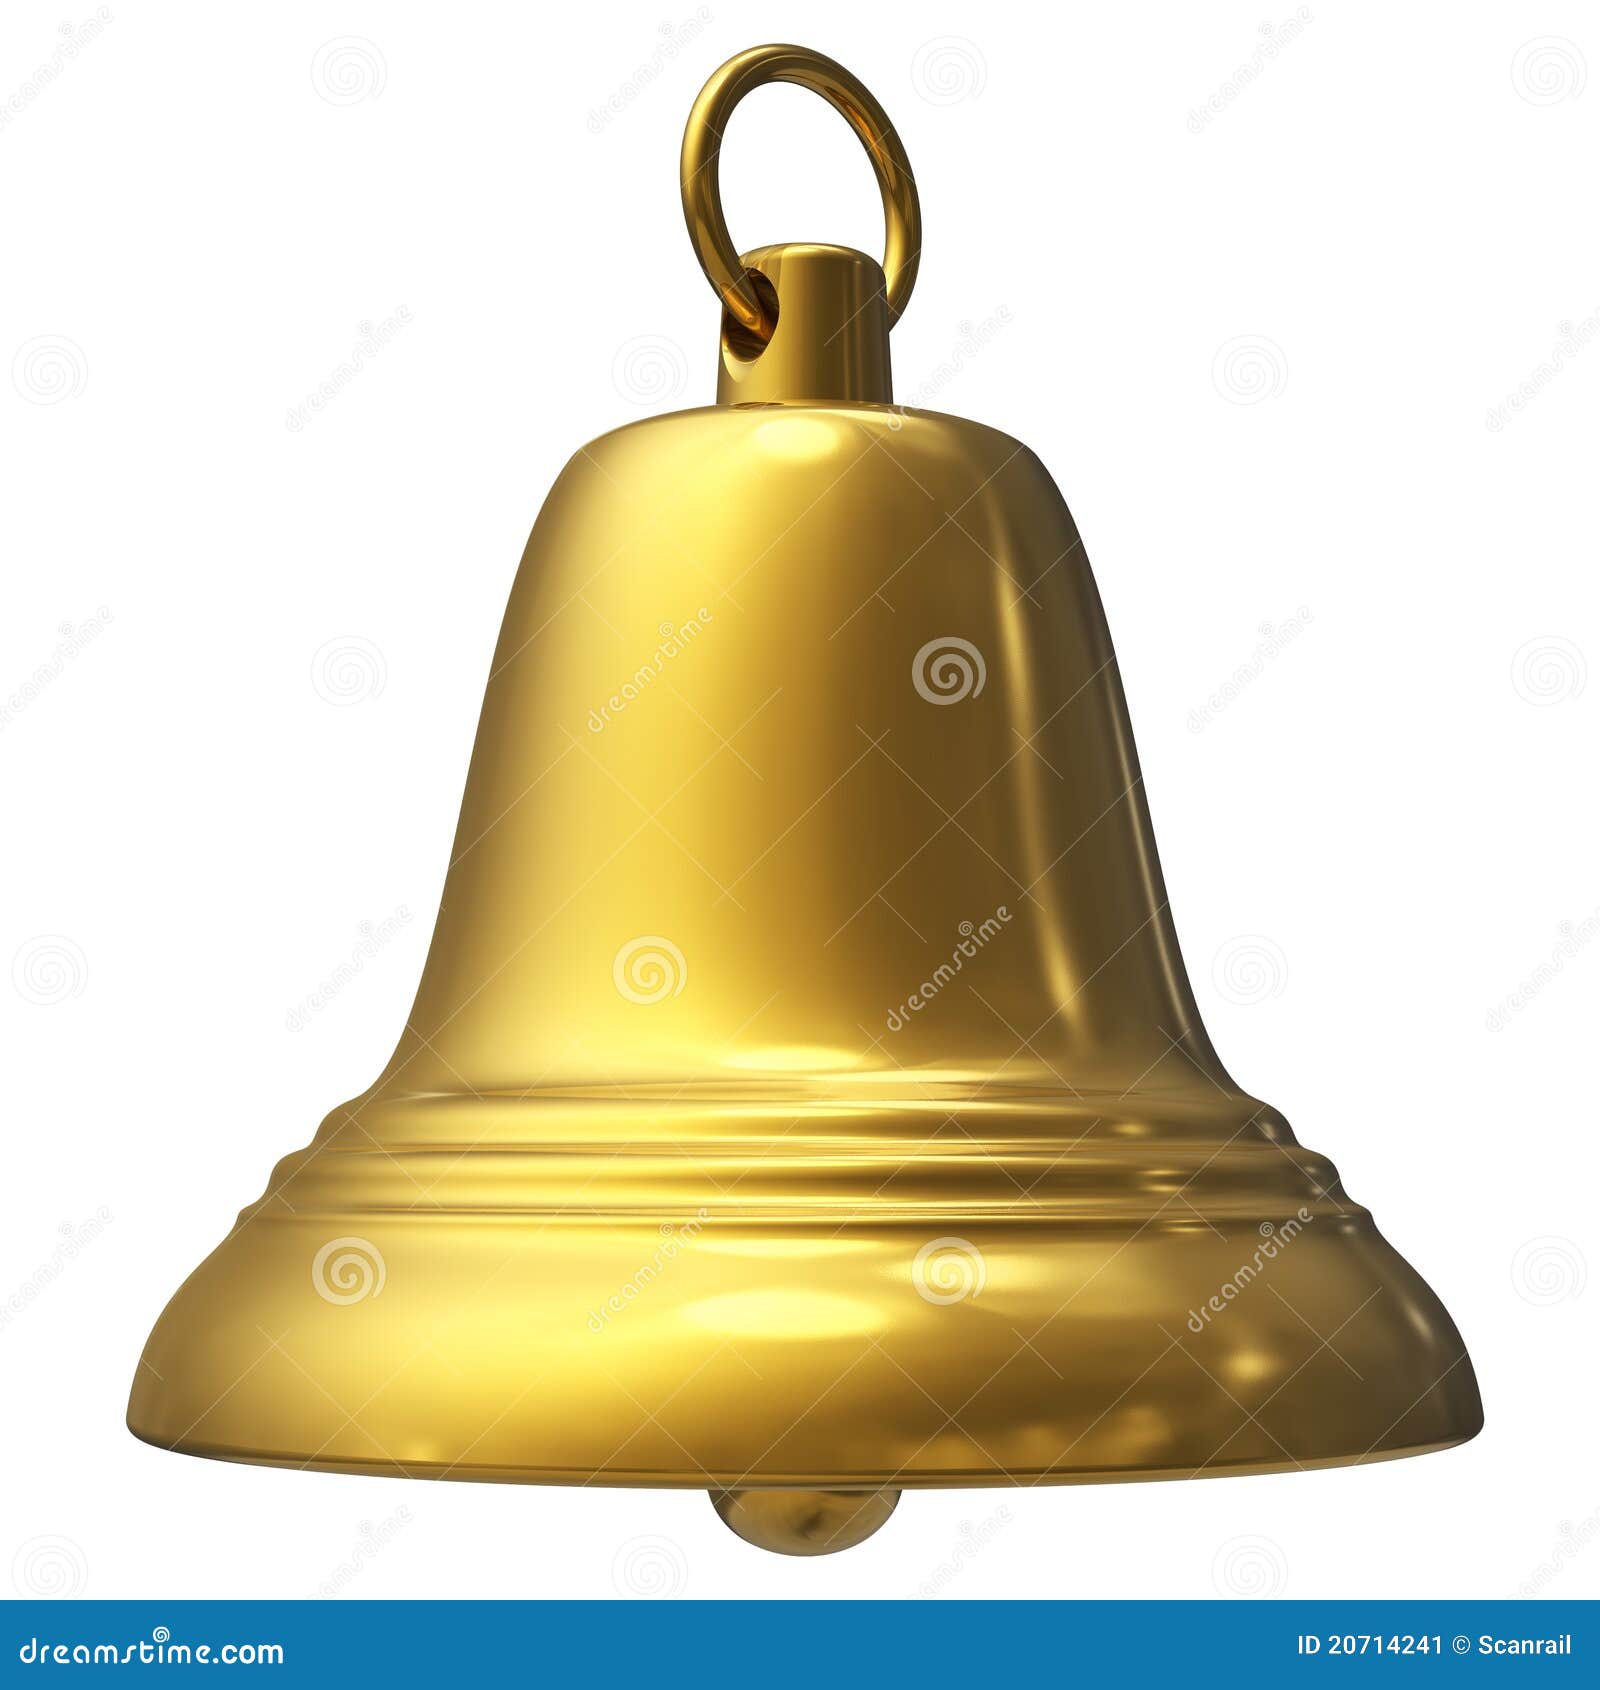 Small Bell Isolated On White Background. Stock Photo, Picture and Royalty  Free Image. Image 65807827.